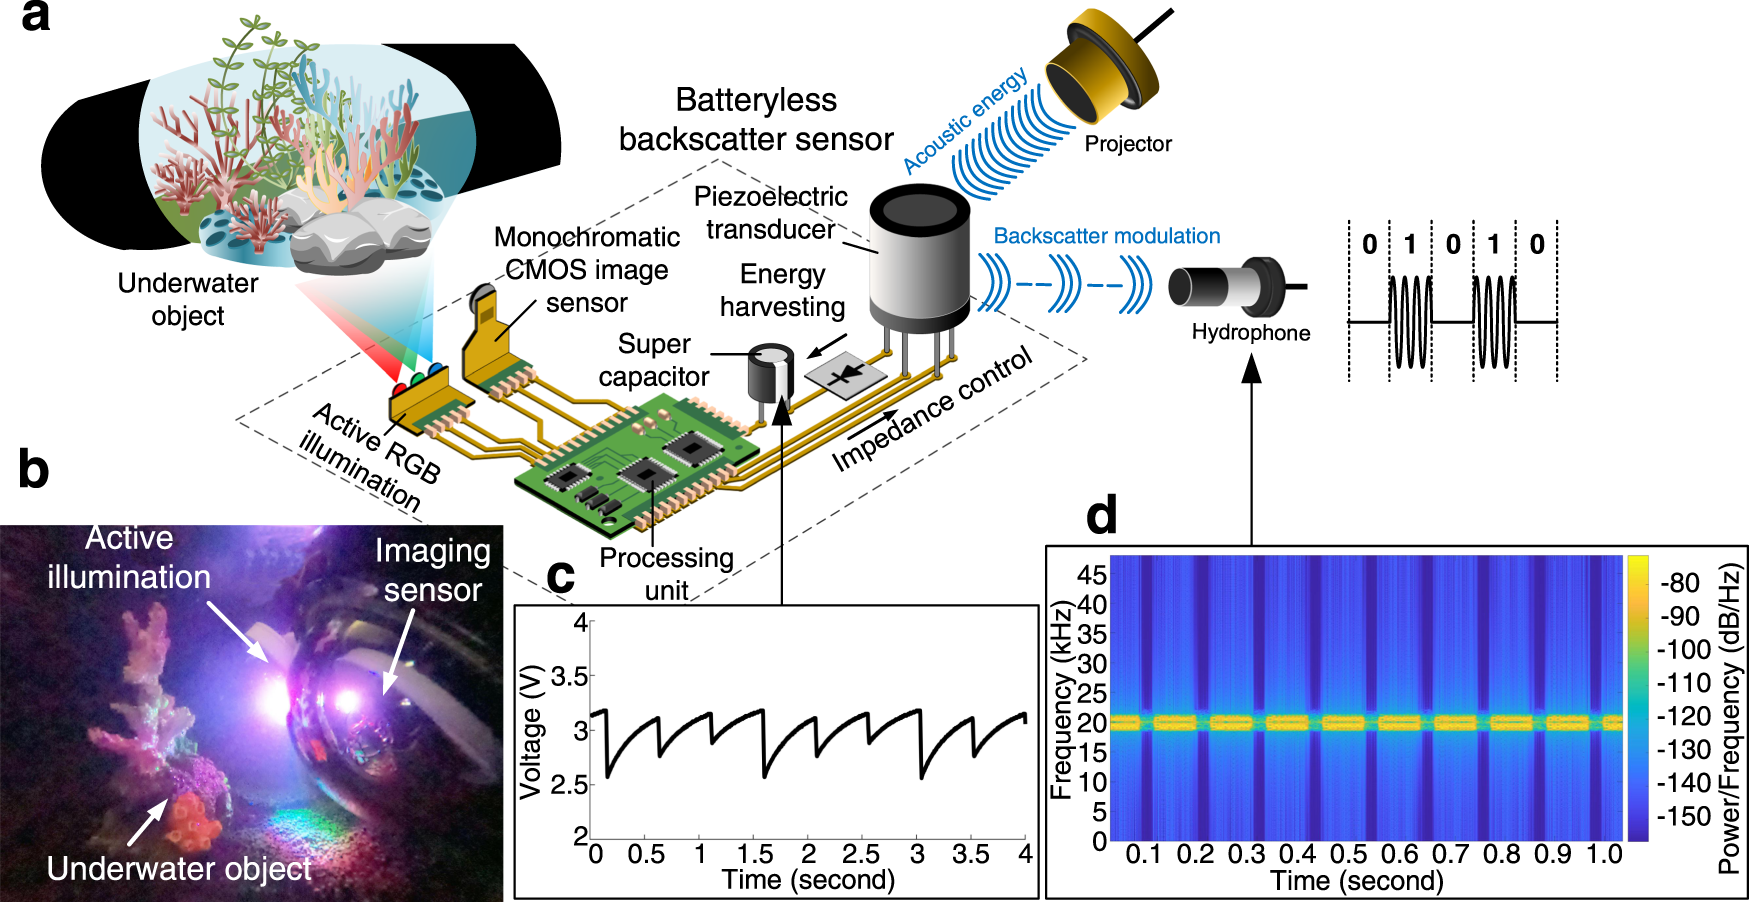 Battery-free wireless imaging of underwater environments